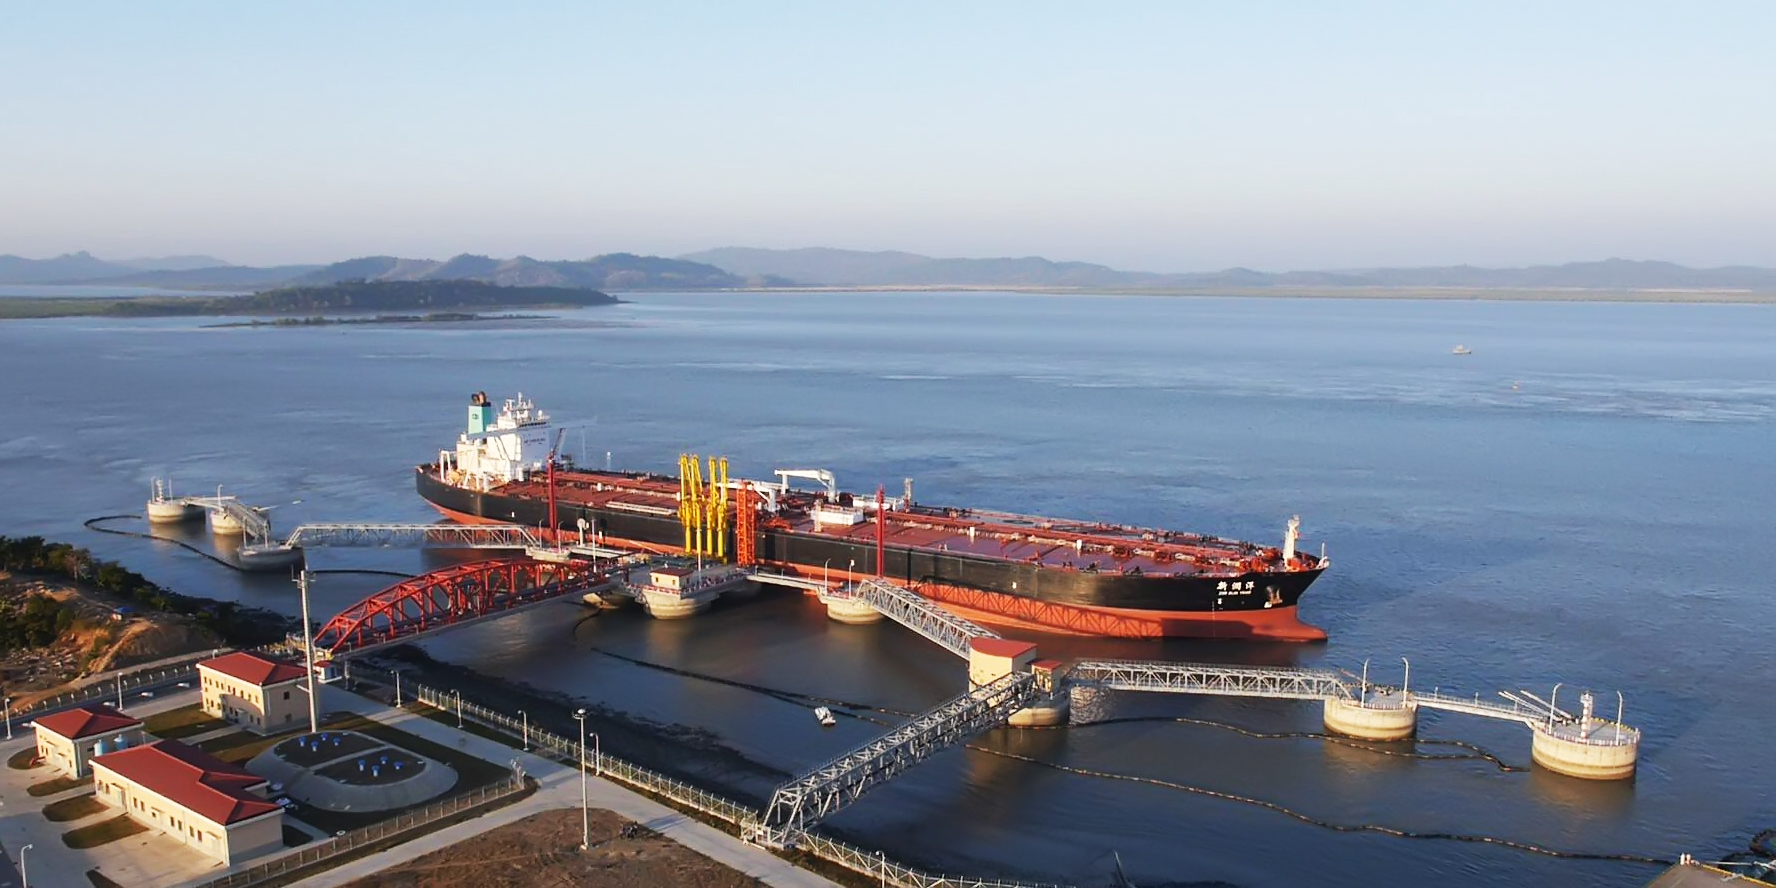 An oil tanker with a capacity of 300,000 tons docking in the Port of Maday Island on January 30, 2015 [Photo: courtesy of PetroChina Myanmar] 